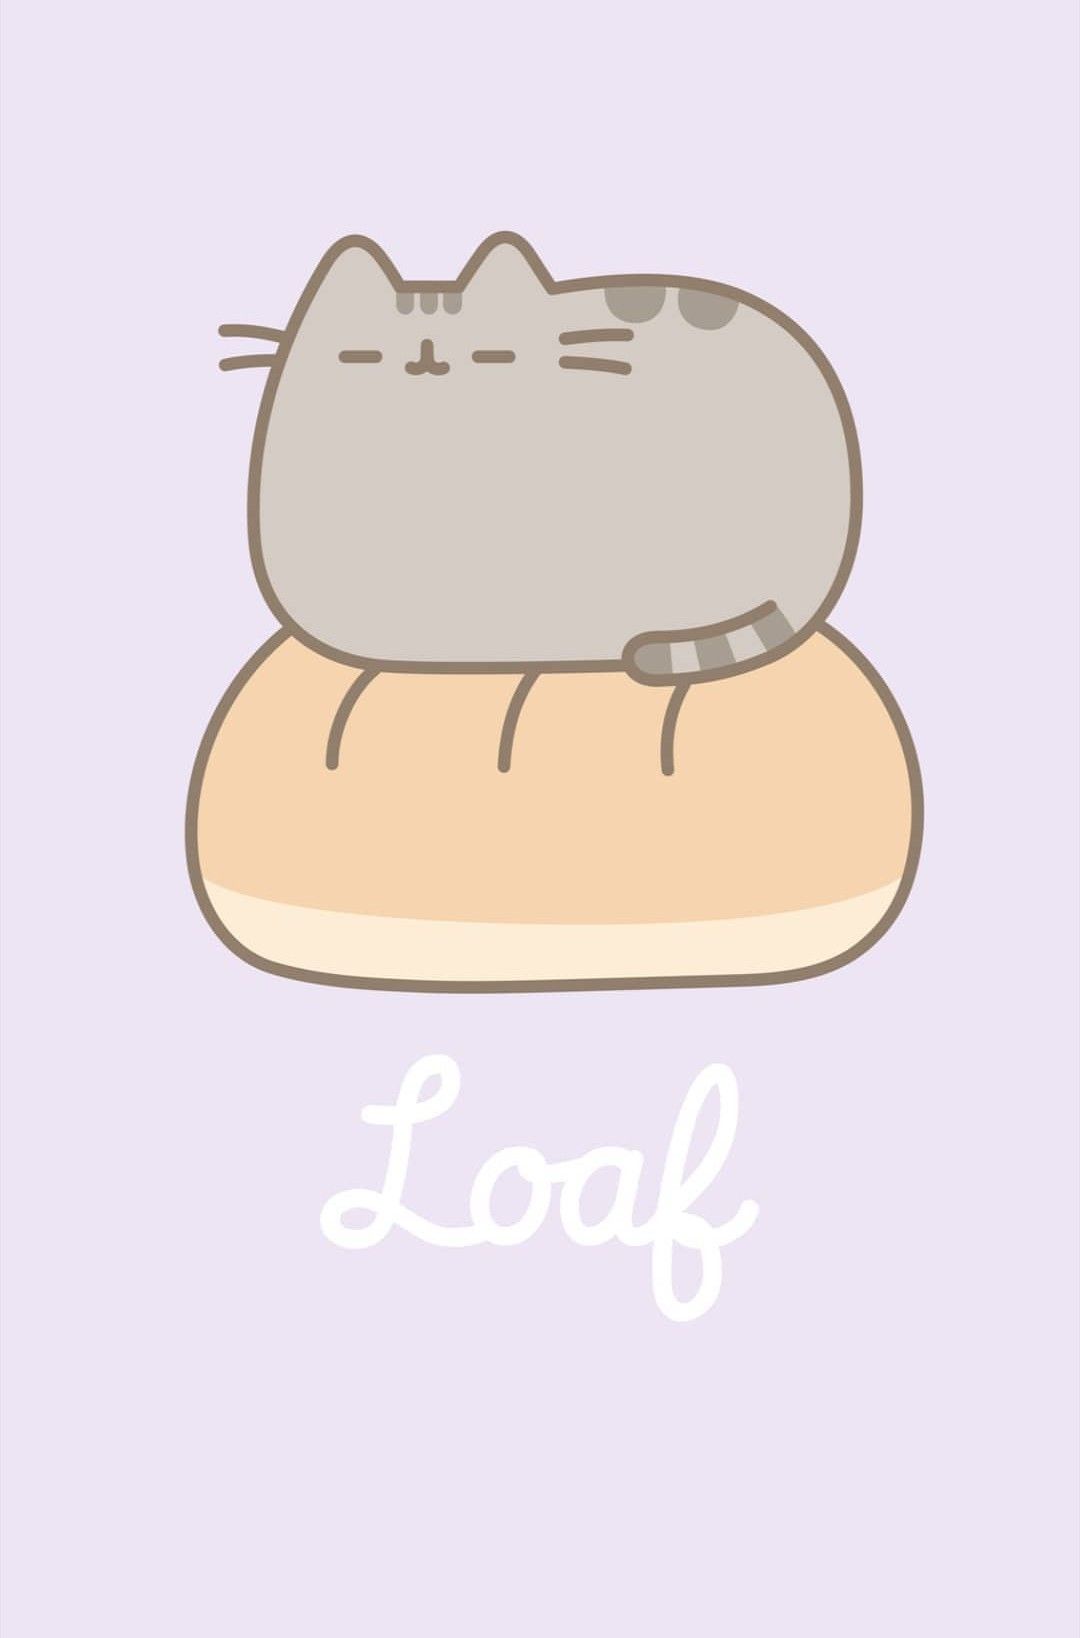 IPhone wallpaper with a cat on a pillow - Pusheen